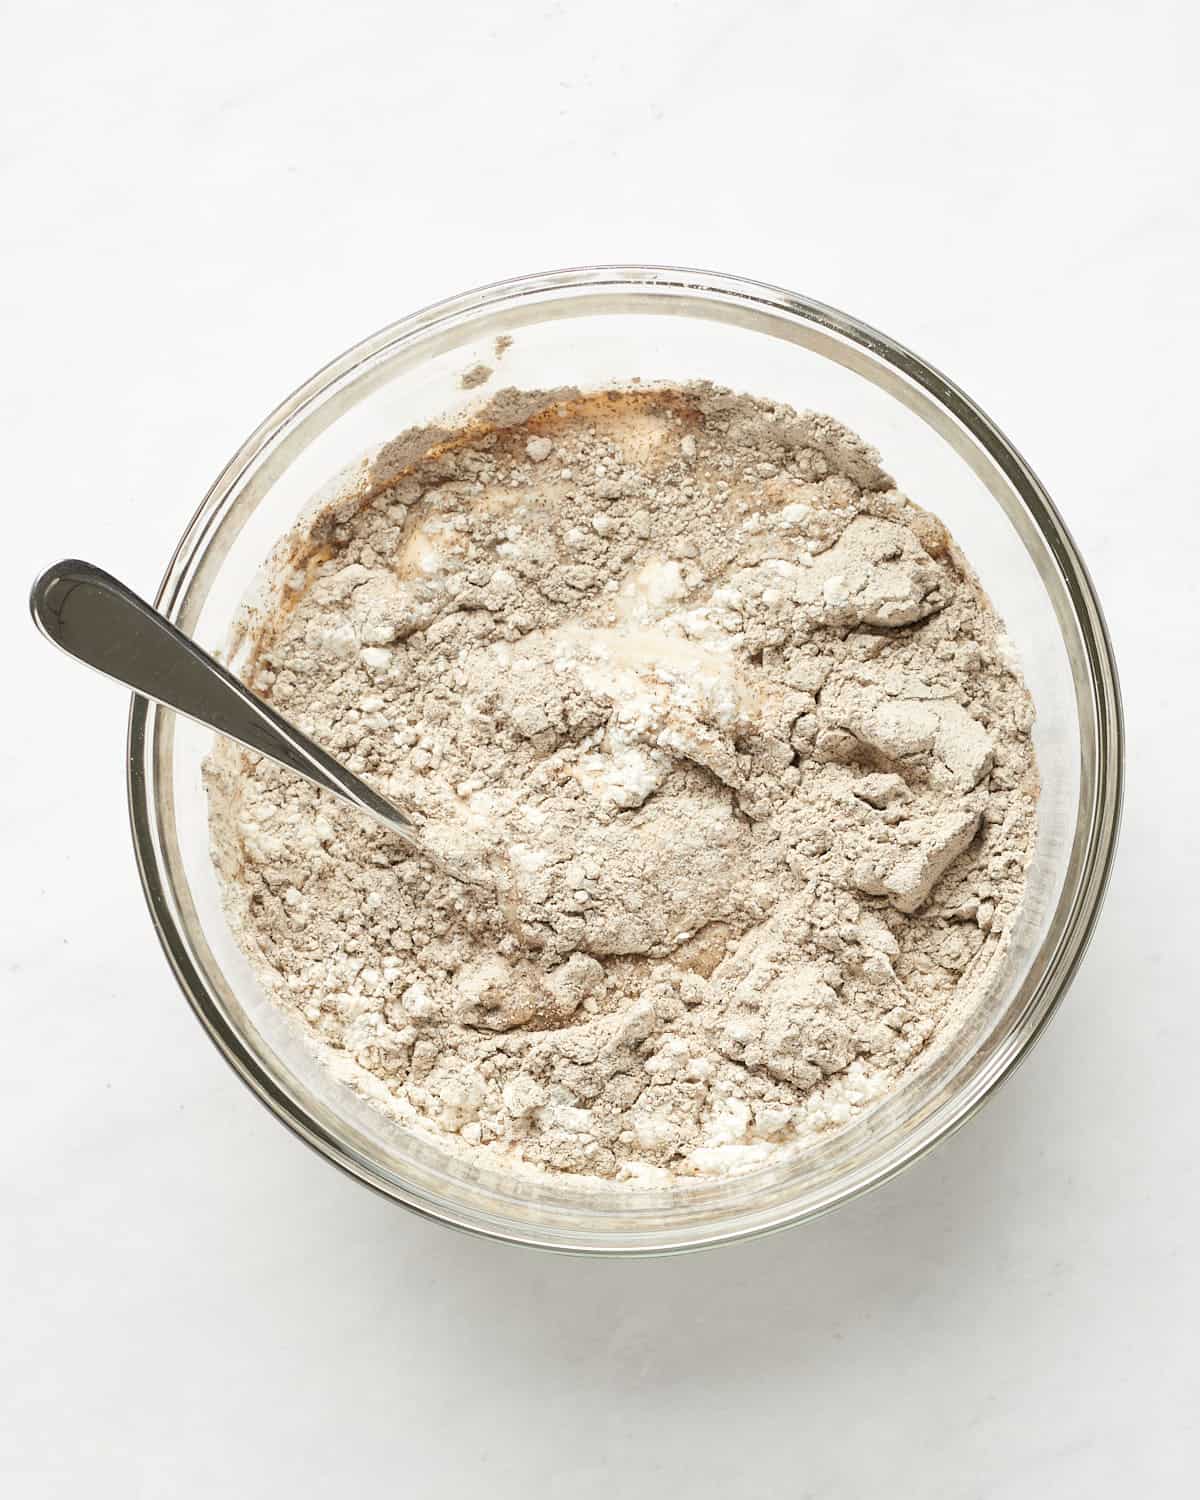 Top view of mixture of soy milk, sourdough discard, and flour in a pint glass jar with spoon on marble background.